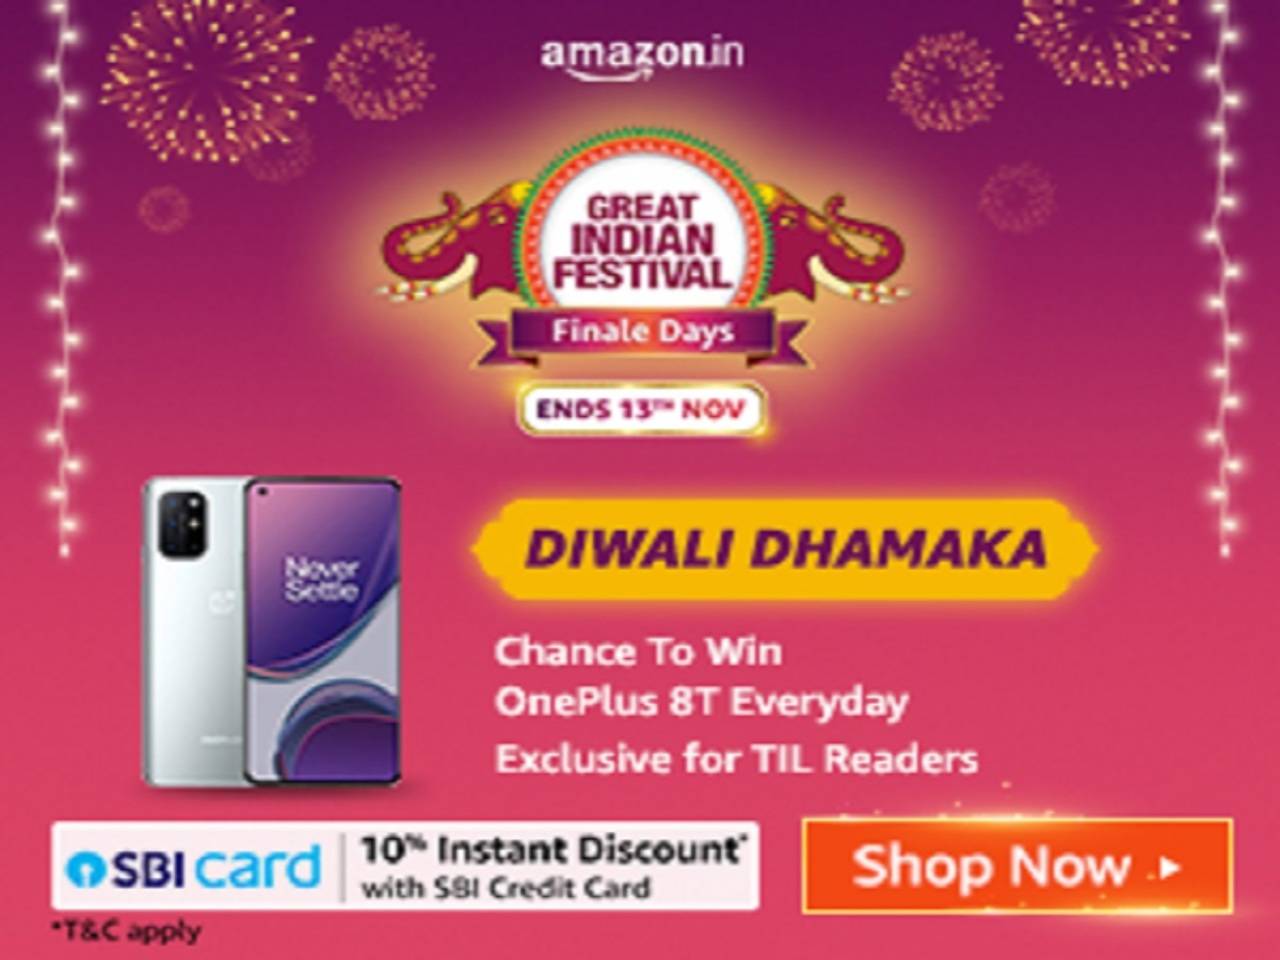 Crunchyroll INDIA Special Diwali Offer!! As part of the Special Diwali  Offer Crunchyroll Annual Mega Fan Subscription: ₹999 will be…